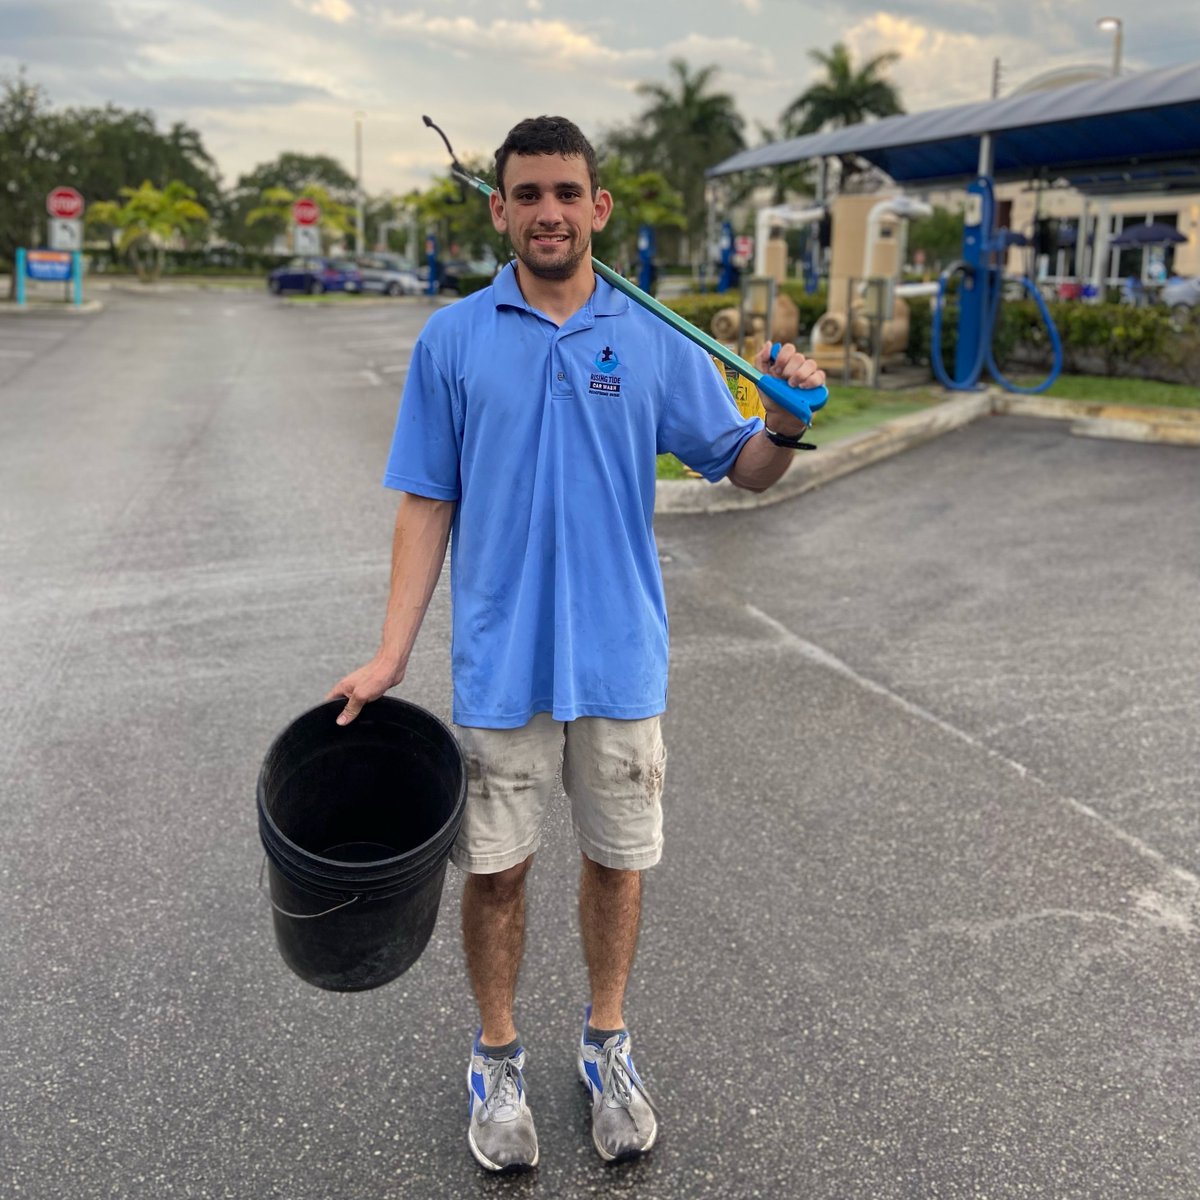 Ready to put in the effort? Marino is! 🤝 Helpful, reliable & hardworking. Any workplace would be lucky to have a team player like him 🙌 #MondayMotivation #autismemployment